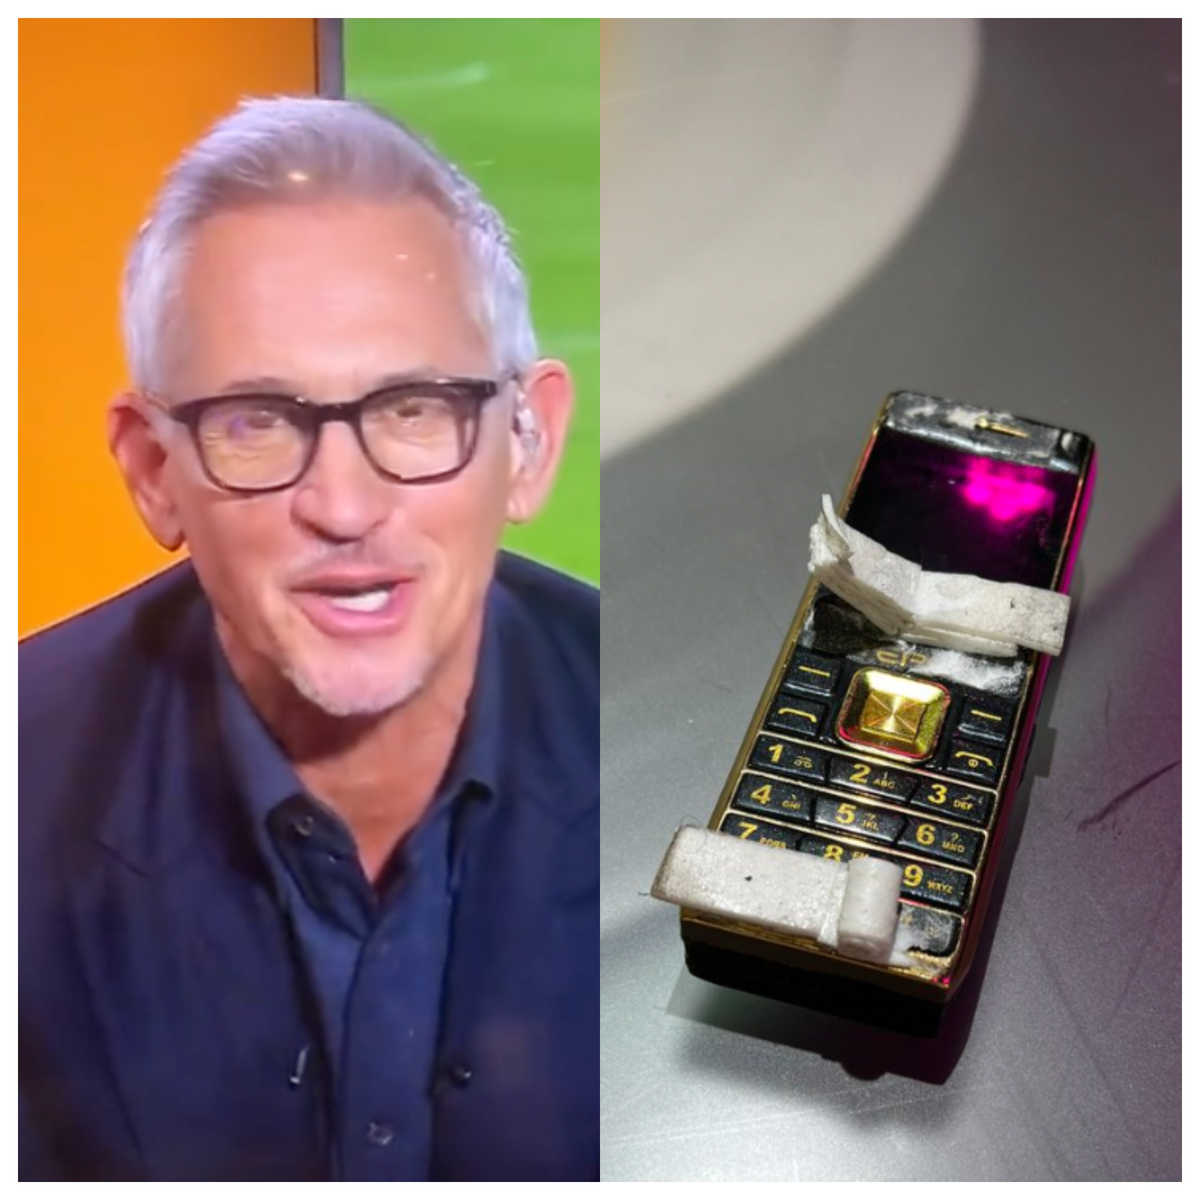 Gary Lineker revealed that a phone had been found taped to the back of the Match of the Day set at Molineux (BBC/@GaryLineker)